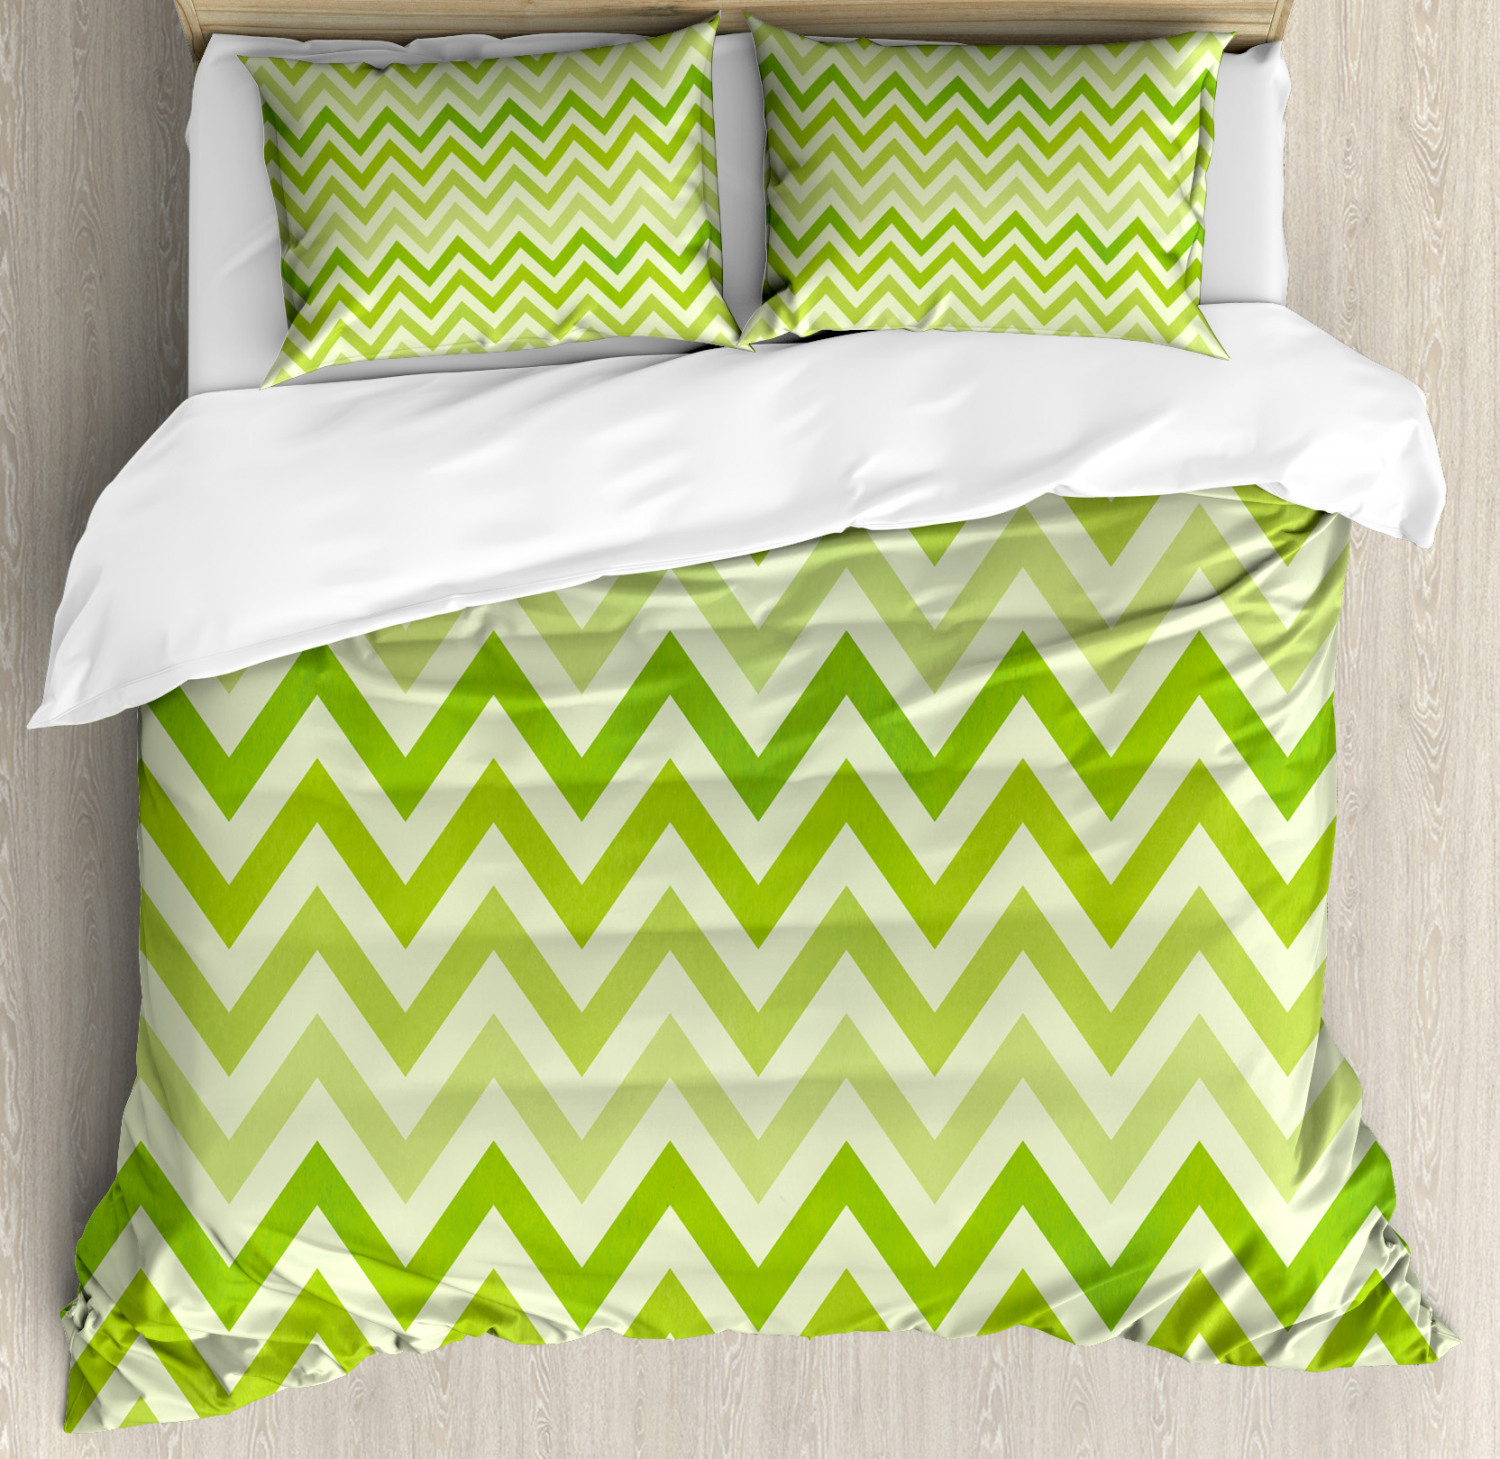 Lime Green Duvet Cover Set With Pillow Shams Traditional Chevron